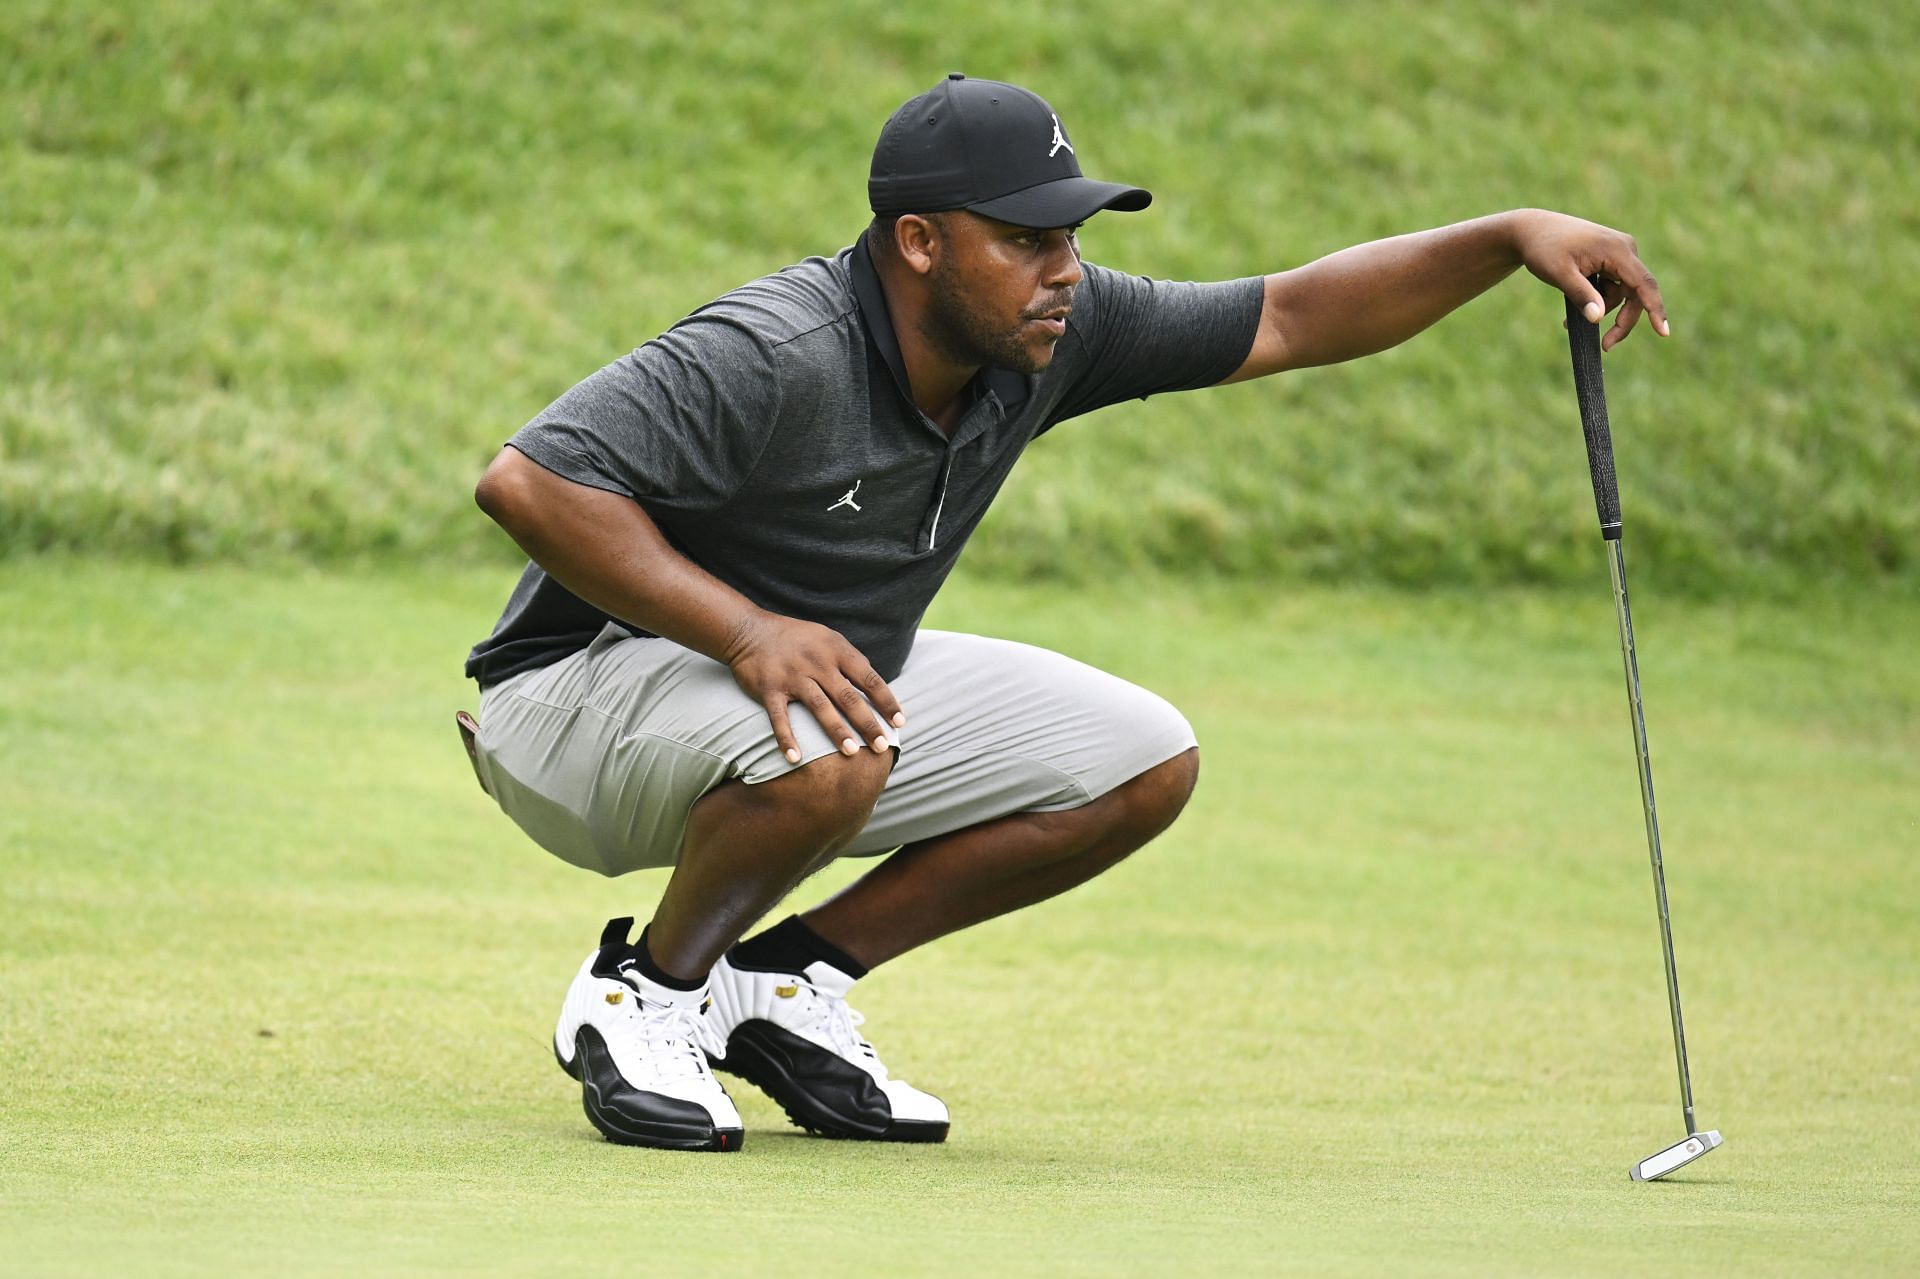 Harold Varner, a pro golfer, said his friend had his heart rate close to sprint levels while playing golf with Michael Jordan.